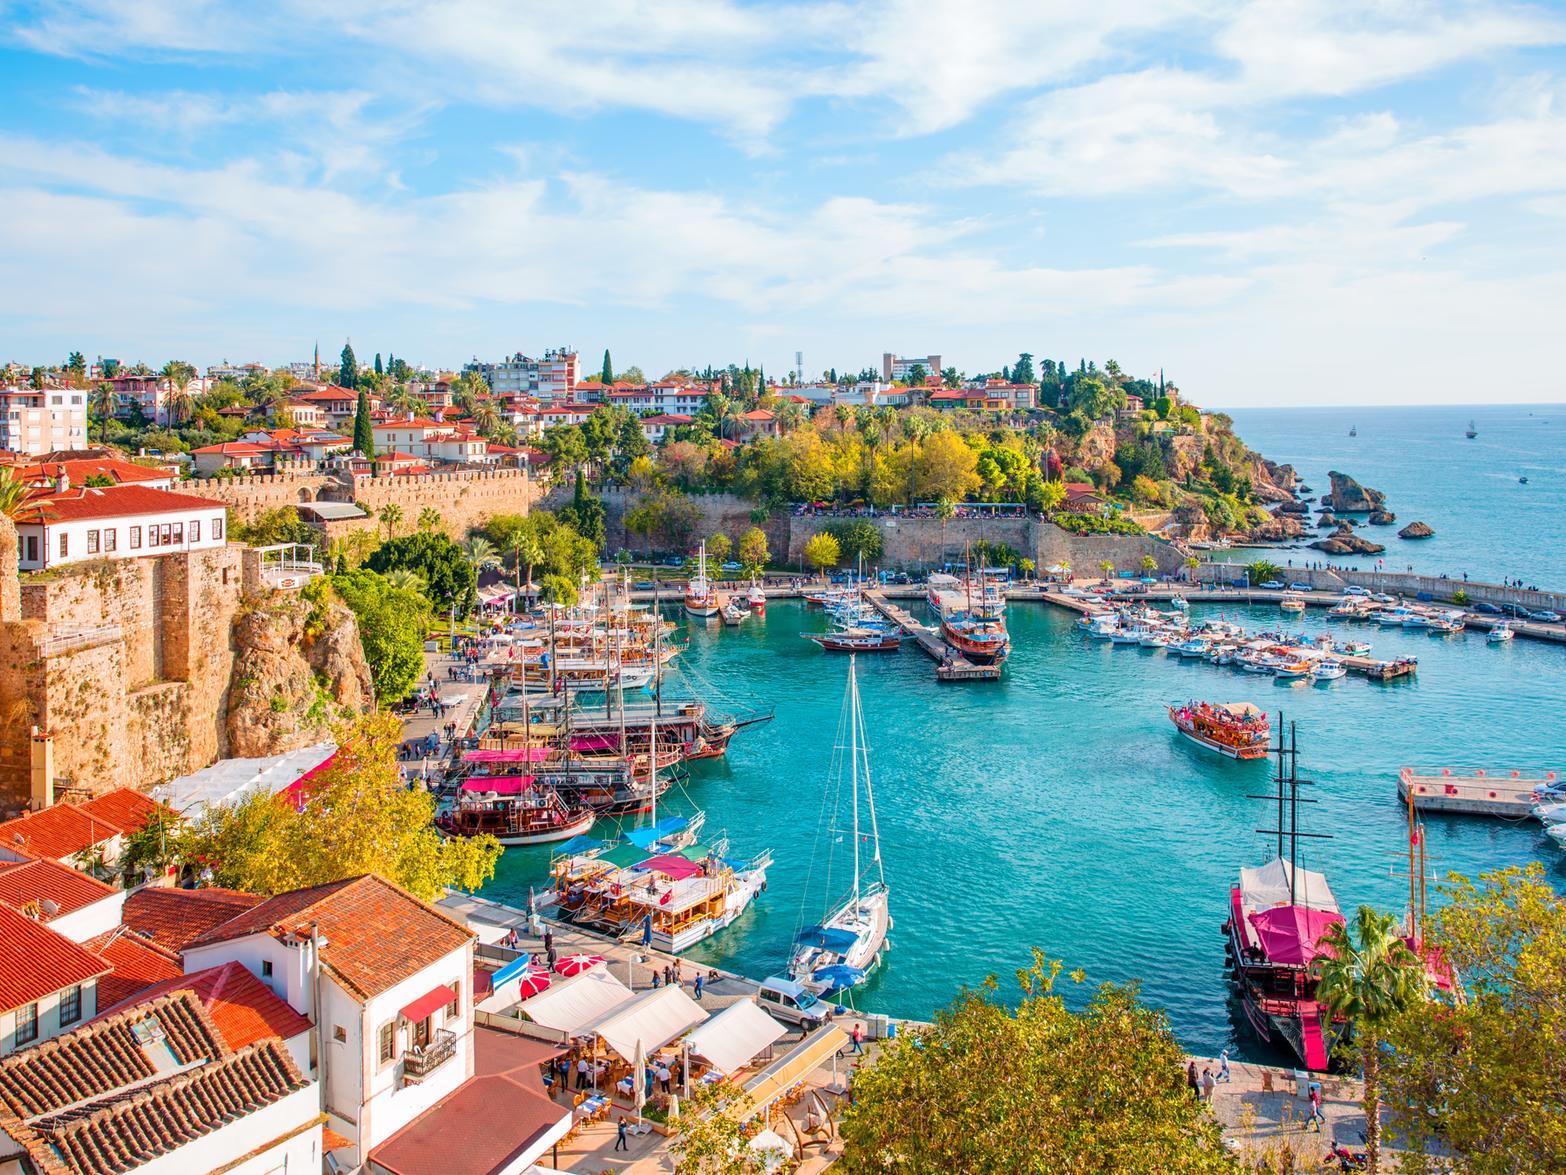 The threshold between Europe and Asia, Turkey is enriched by both cultures, and has plenty of its own to offer visitors too.